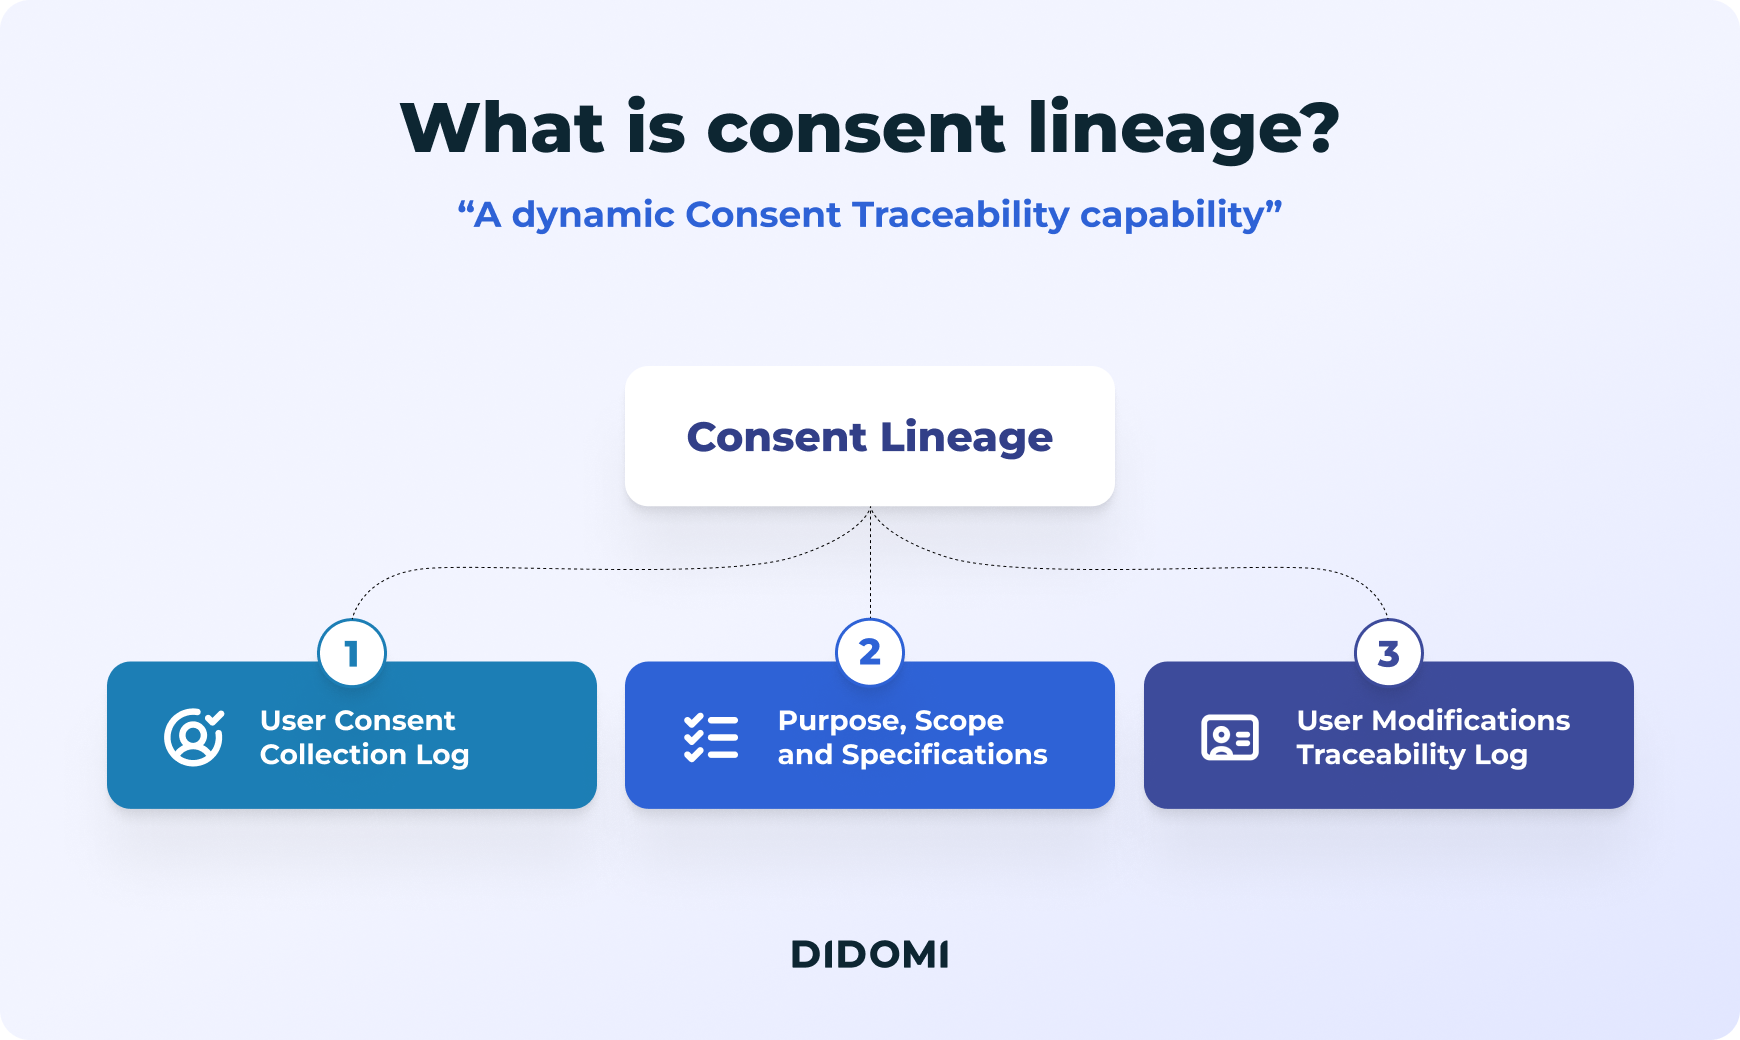 Didomi - What is Consent Lineage